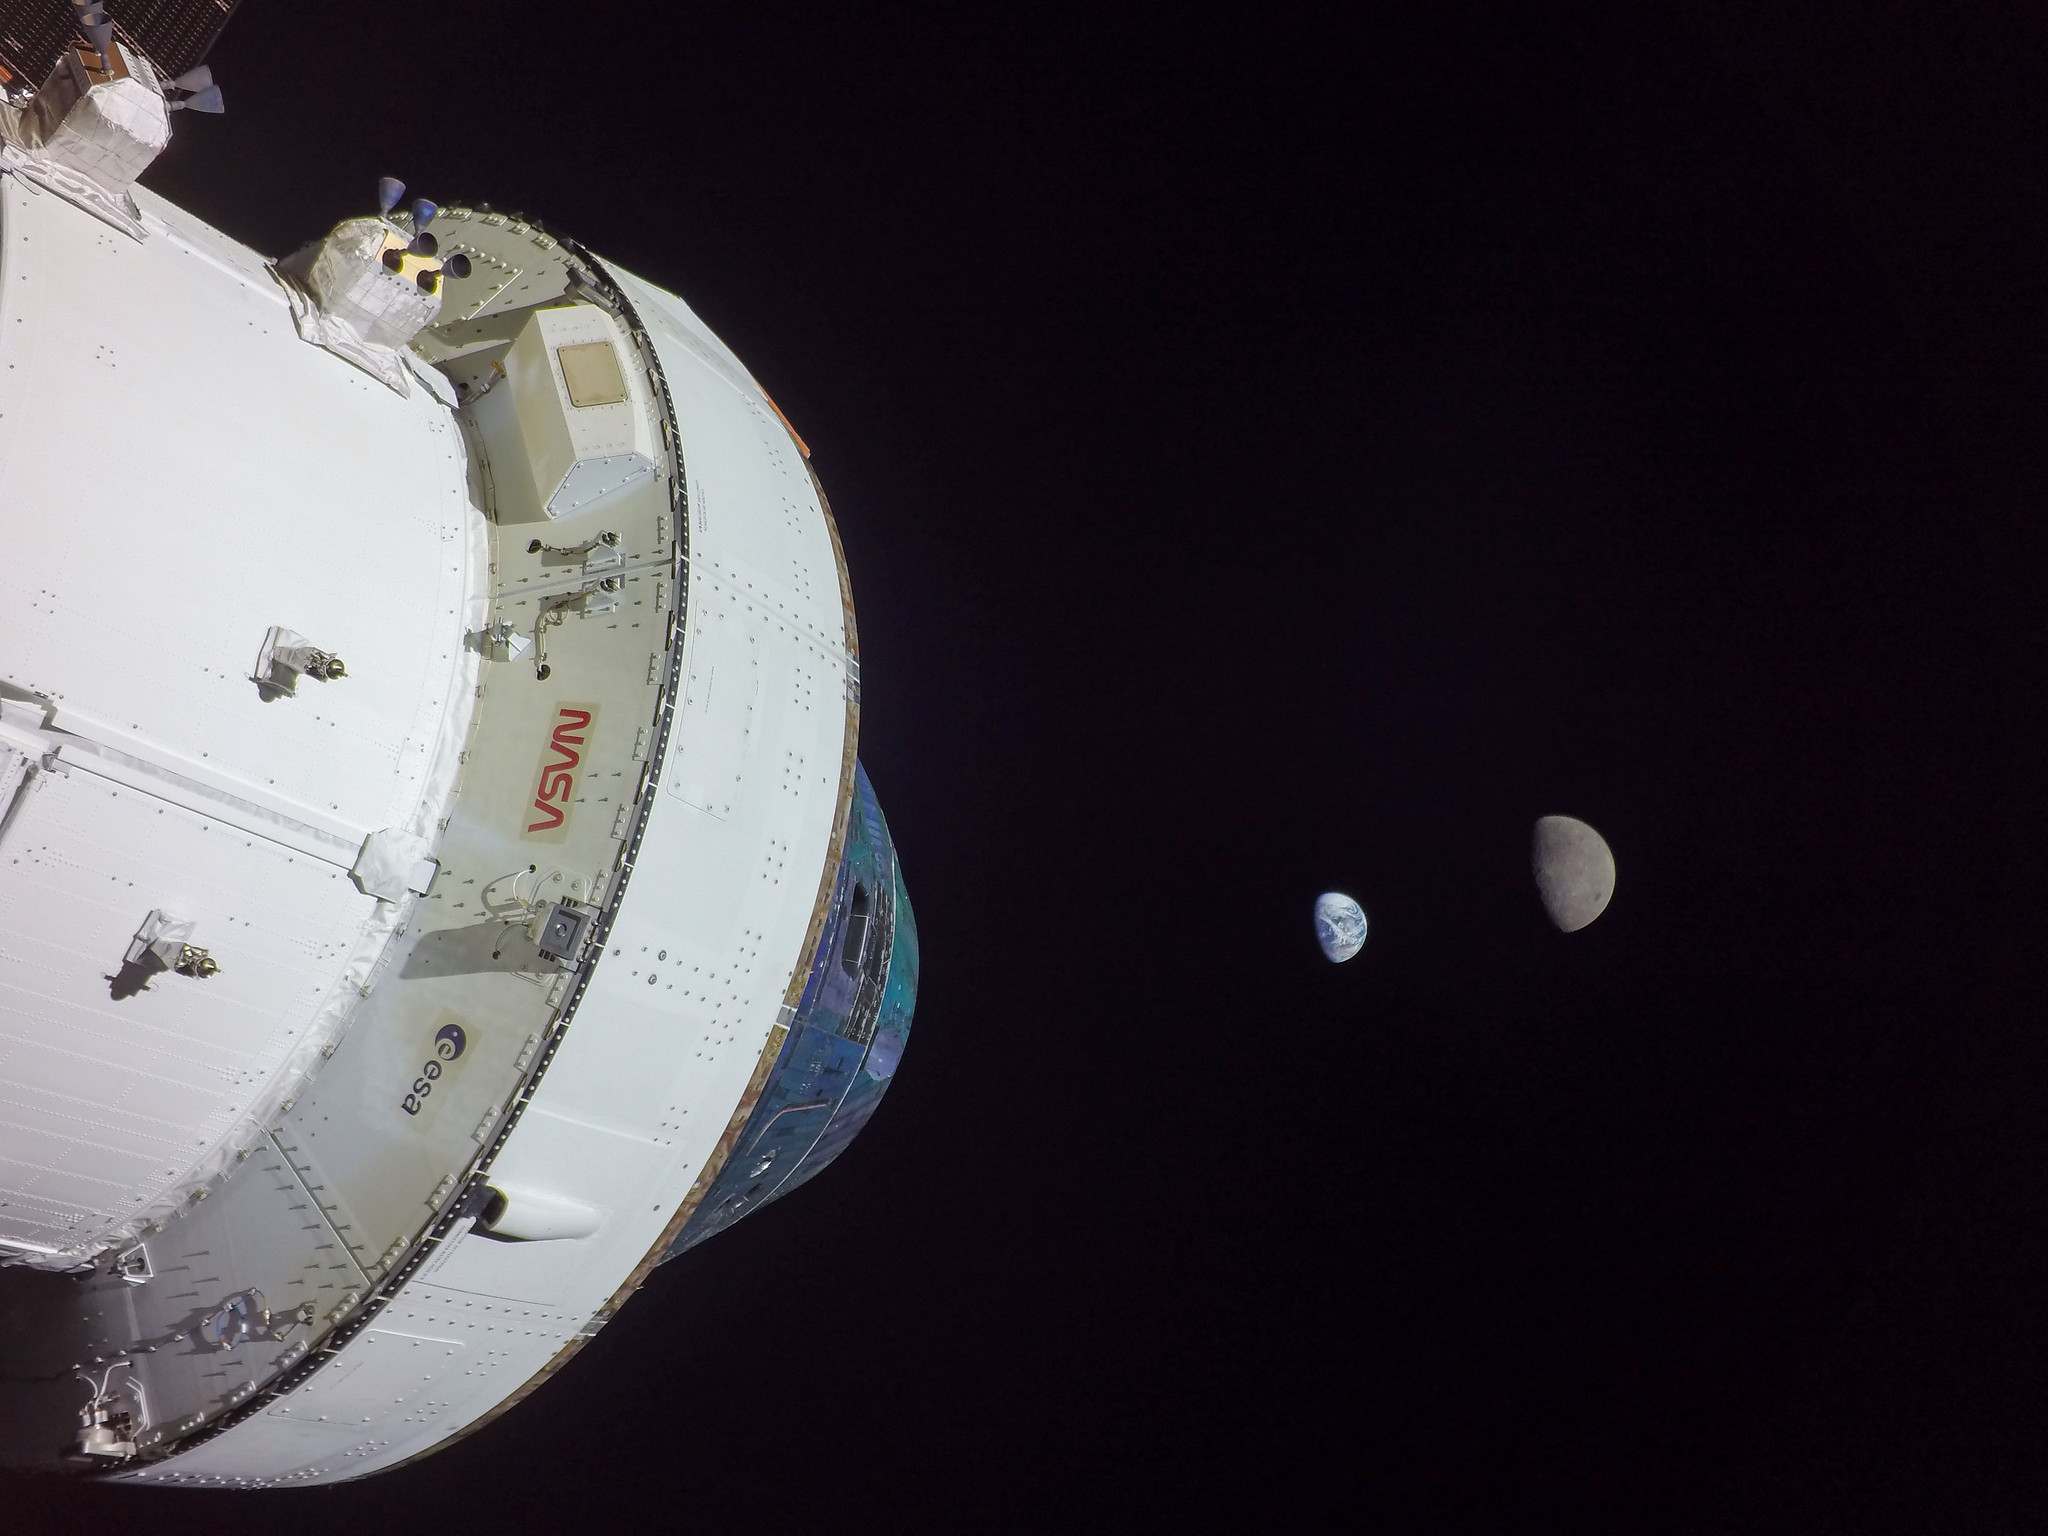 A spacecraft with the Moon and Mars in the distance